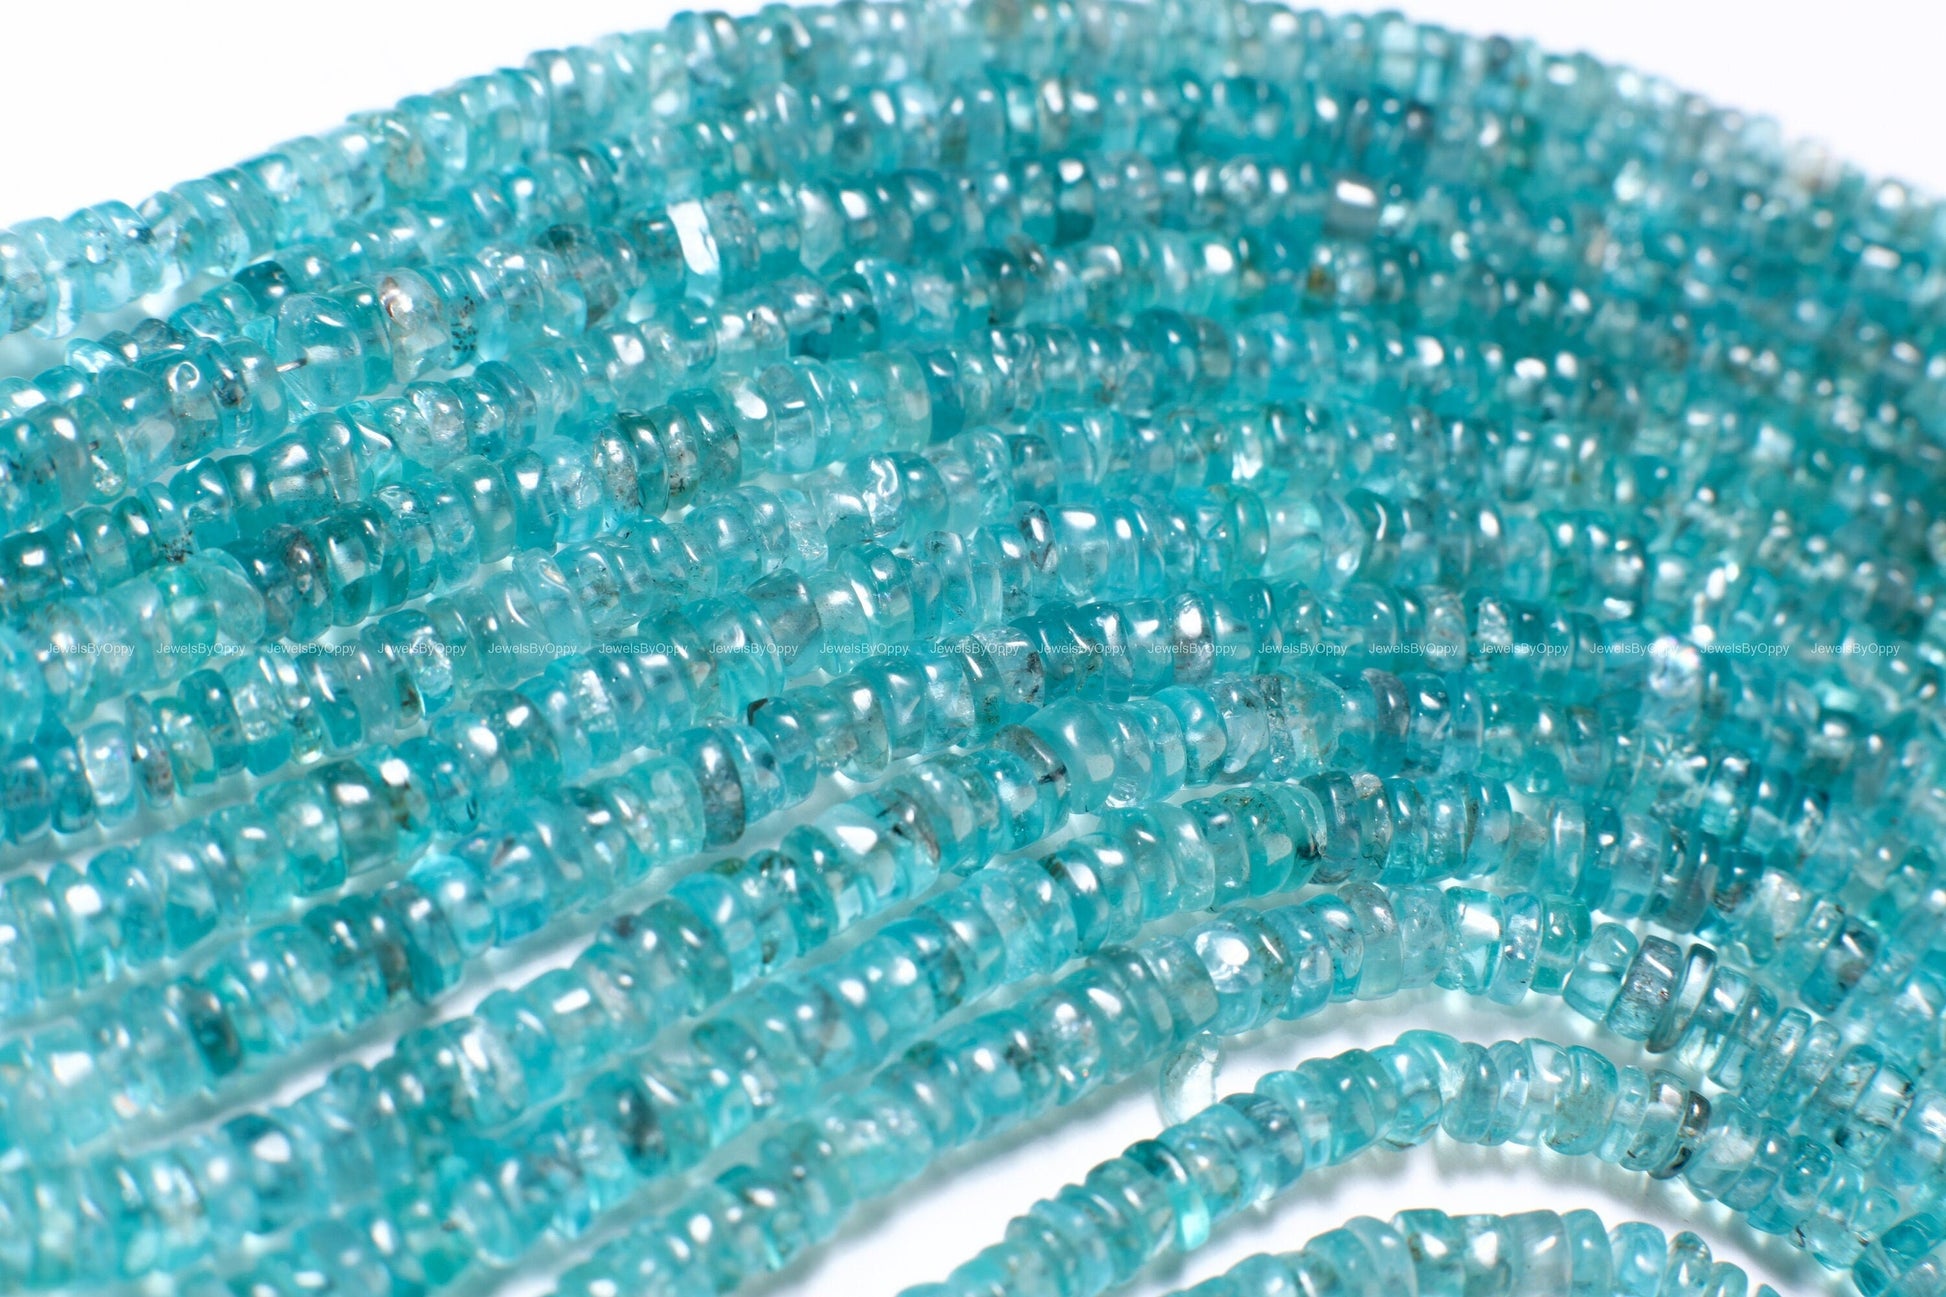 Neon Blue Apatite 3-5mm Heishe tyre Beads, 8&quot; strand for Jewelry Making Natural Apatite Gemstone Beads